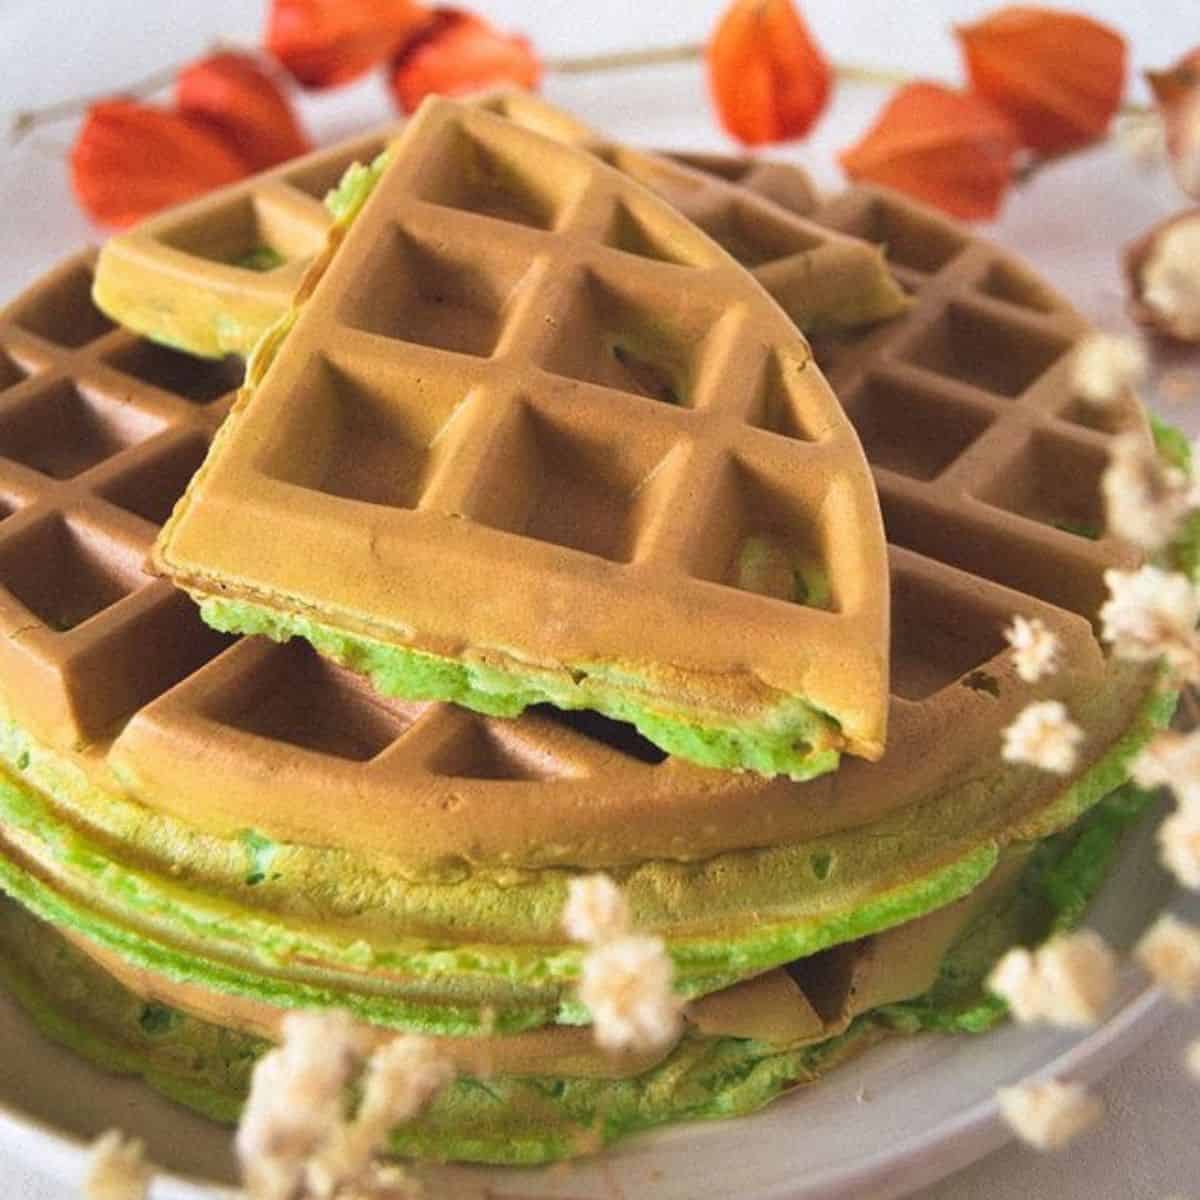 Pandan mochi waffle with flowers on the side